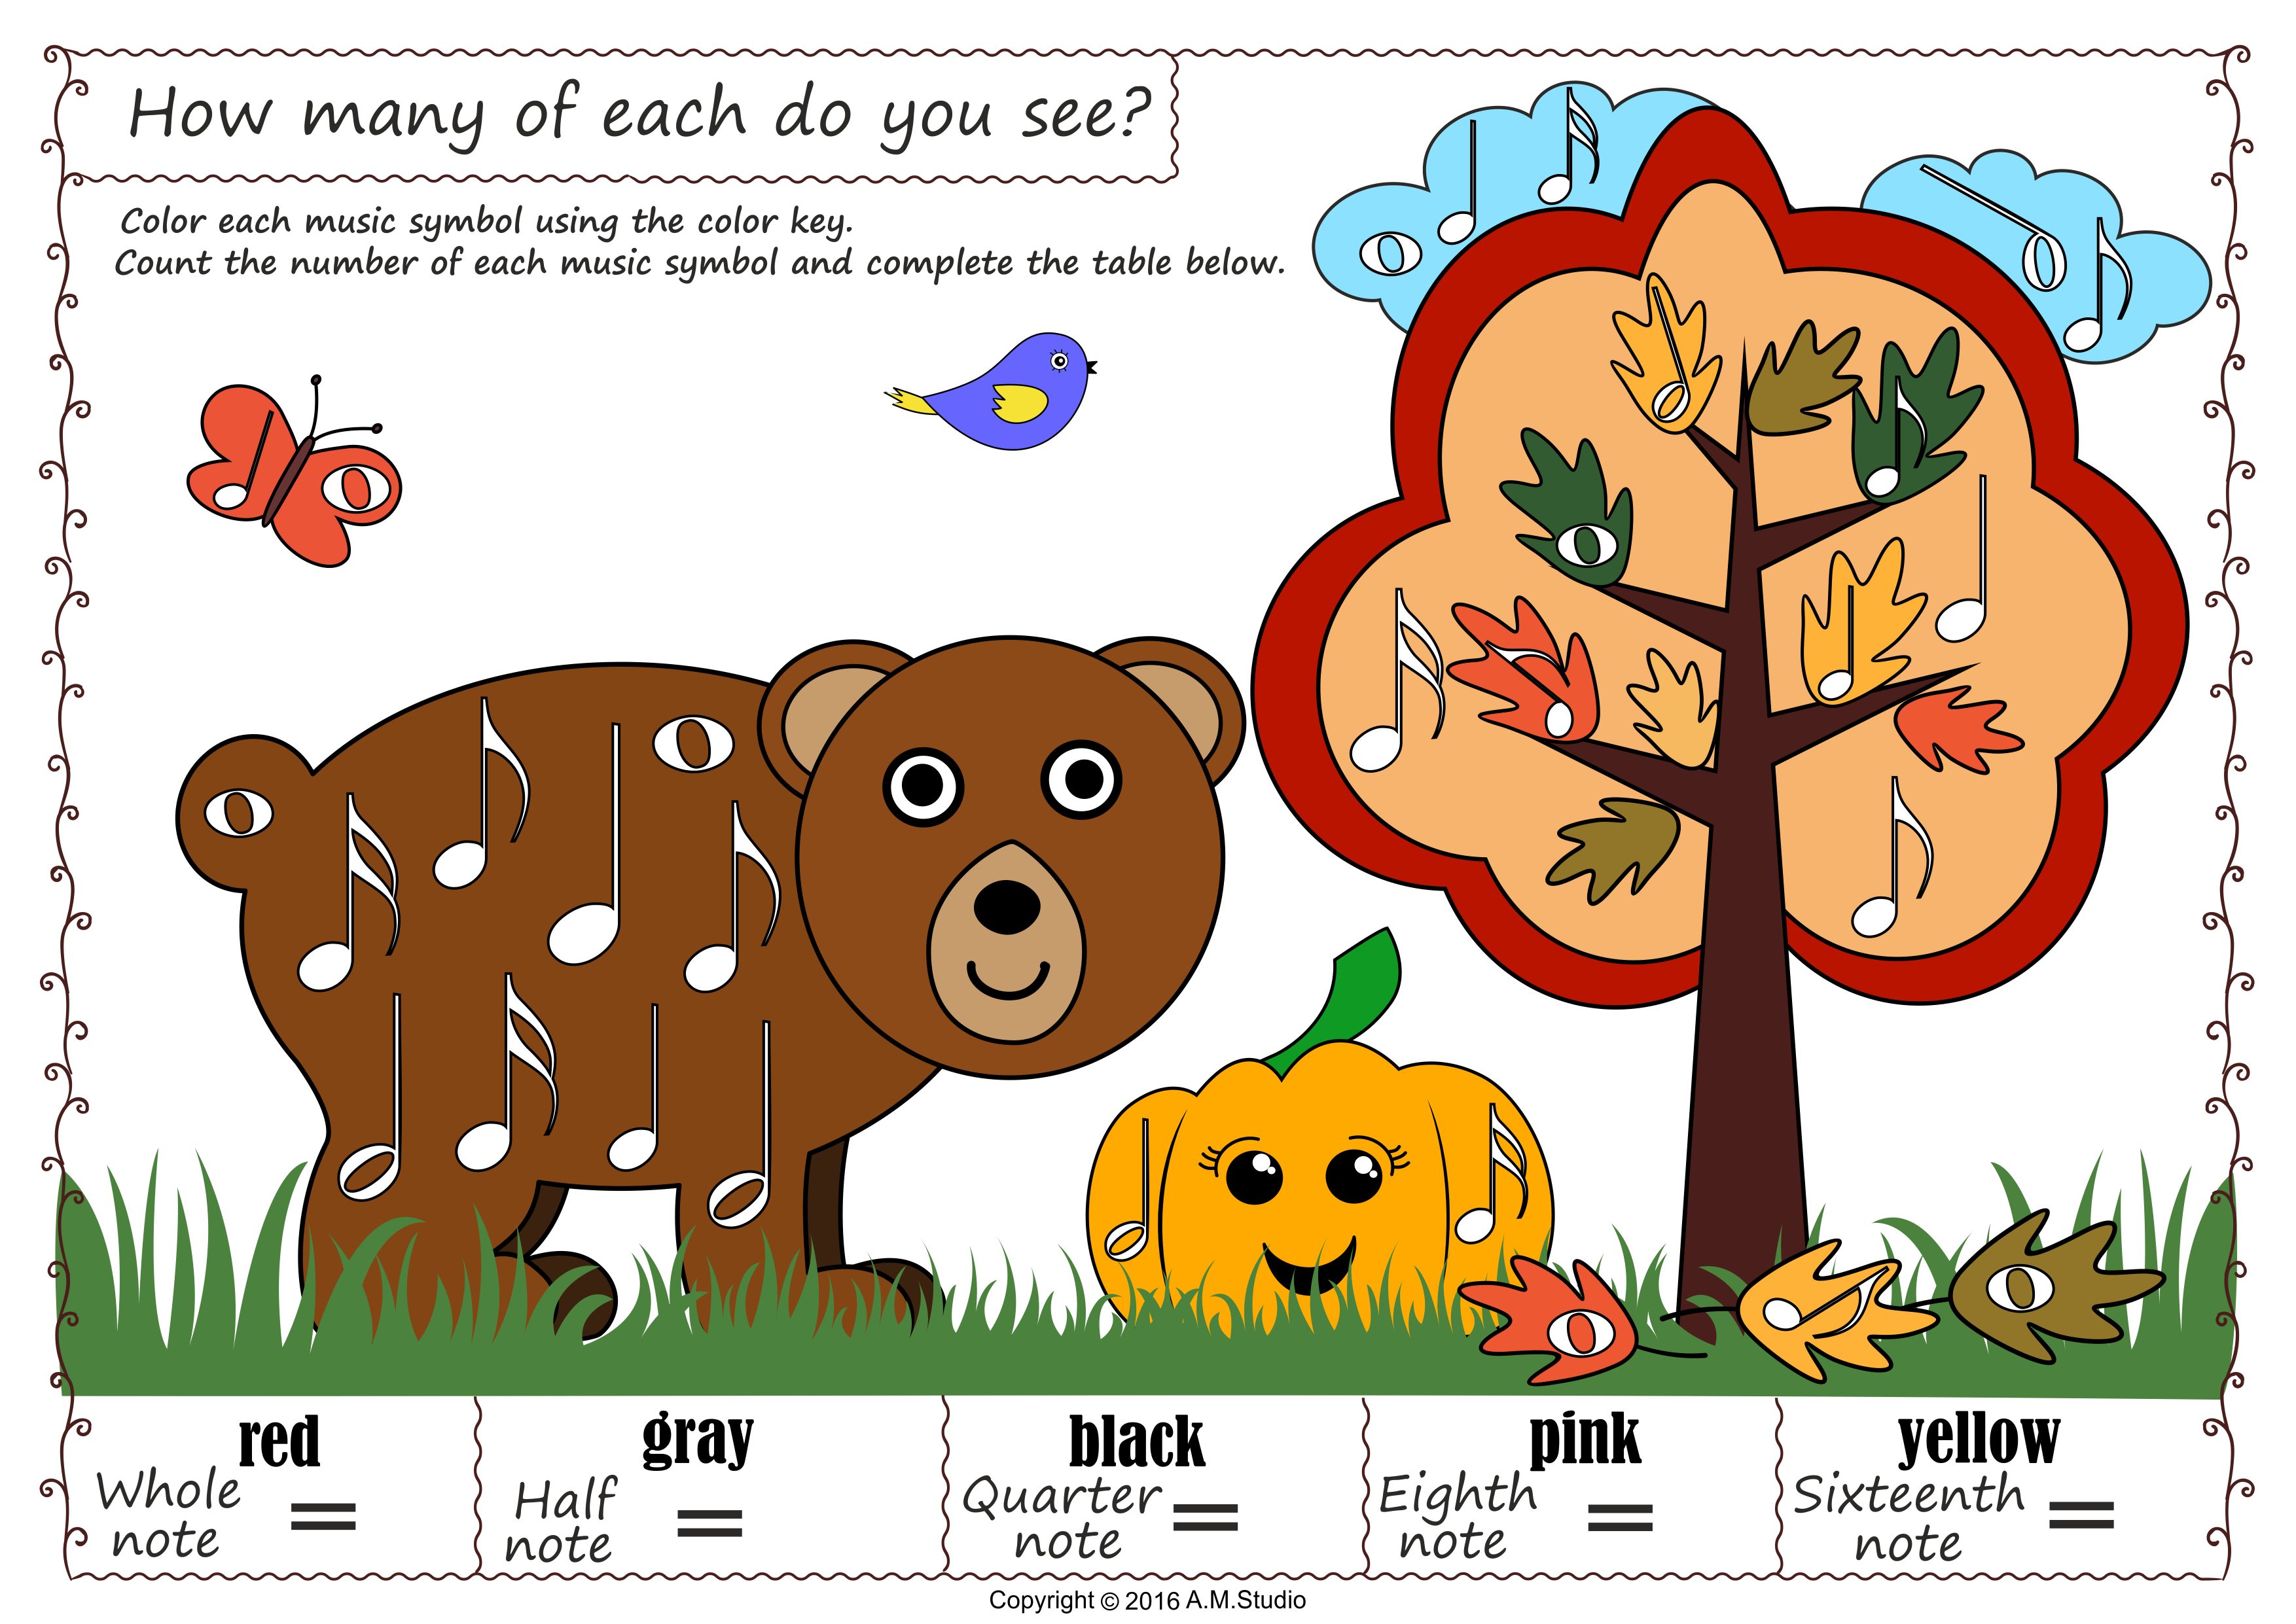 I Spy Music Symbols Coloring Activities | Fall Themed (img # 1)